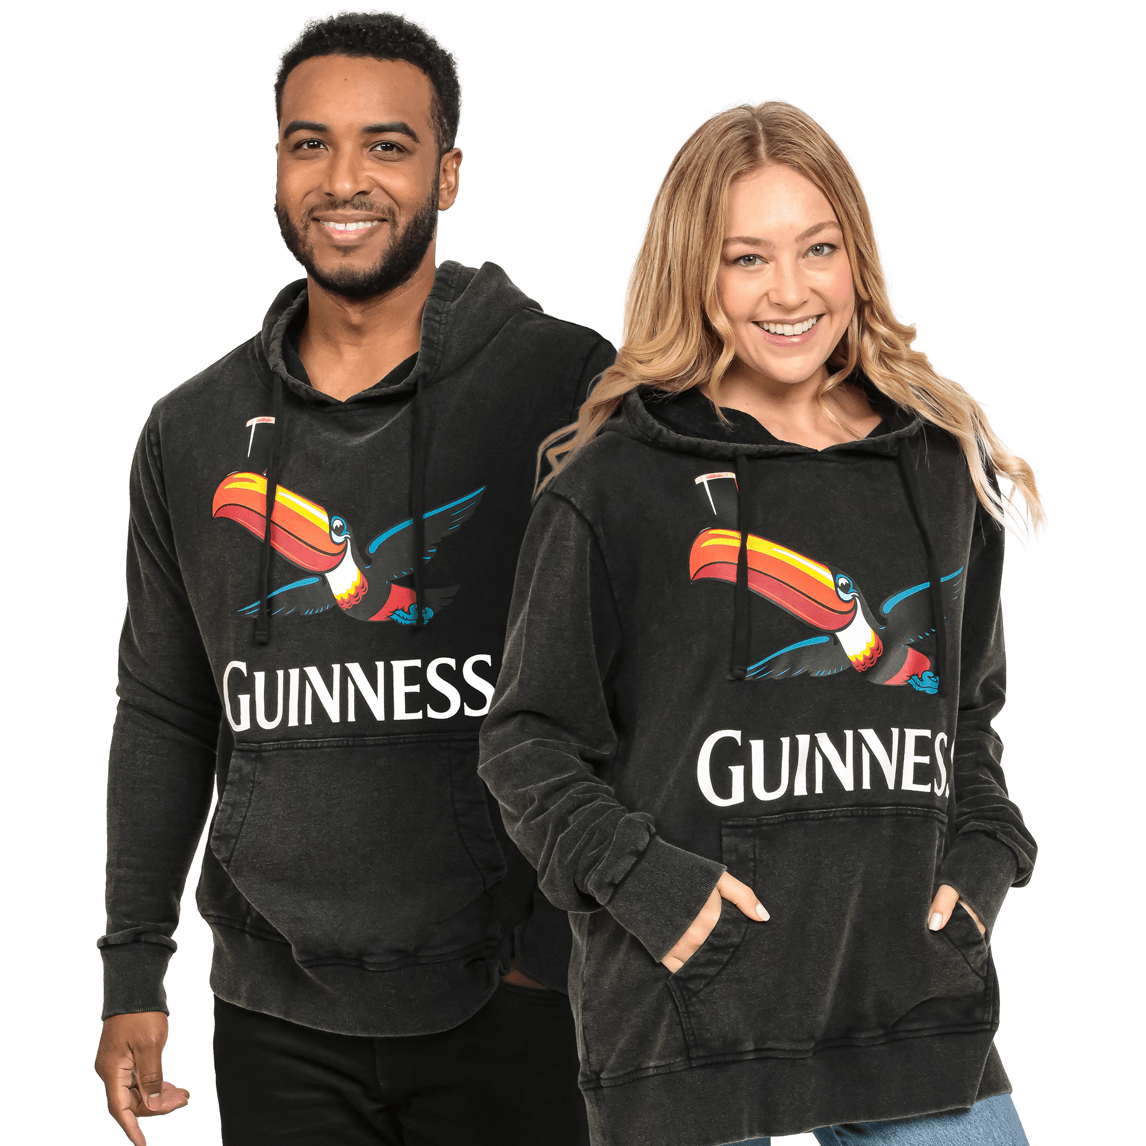 Two people wearing a Guinness Premium Label Toucan Hoodie featuring a Toucan emblem.